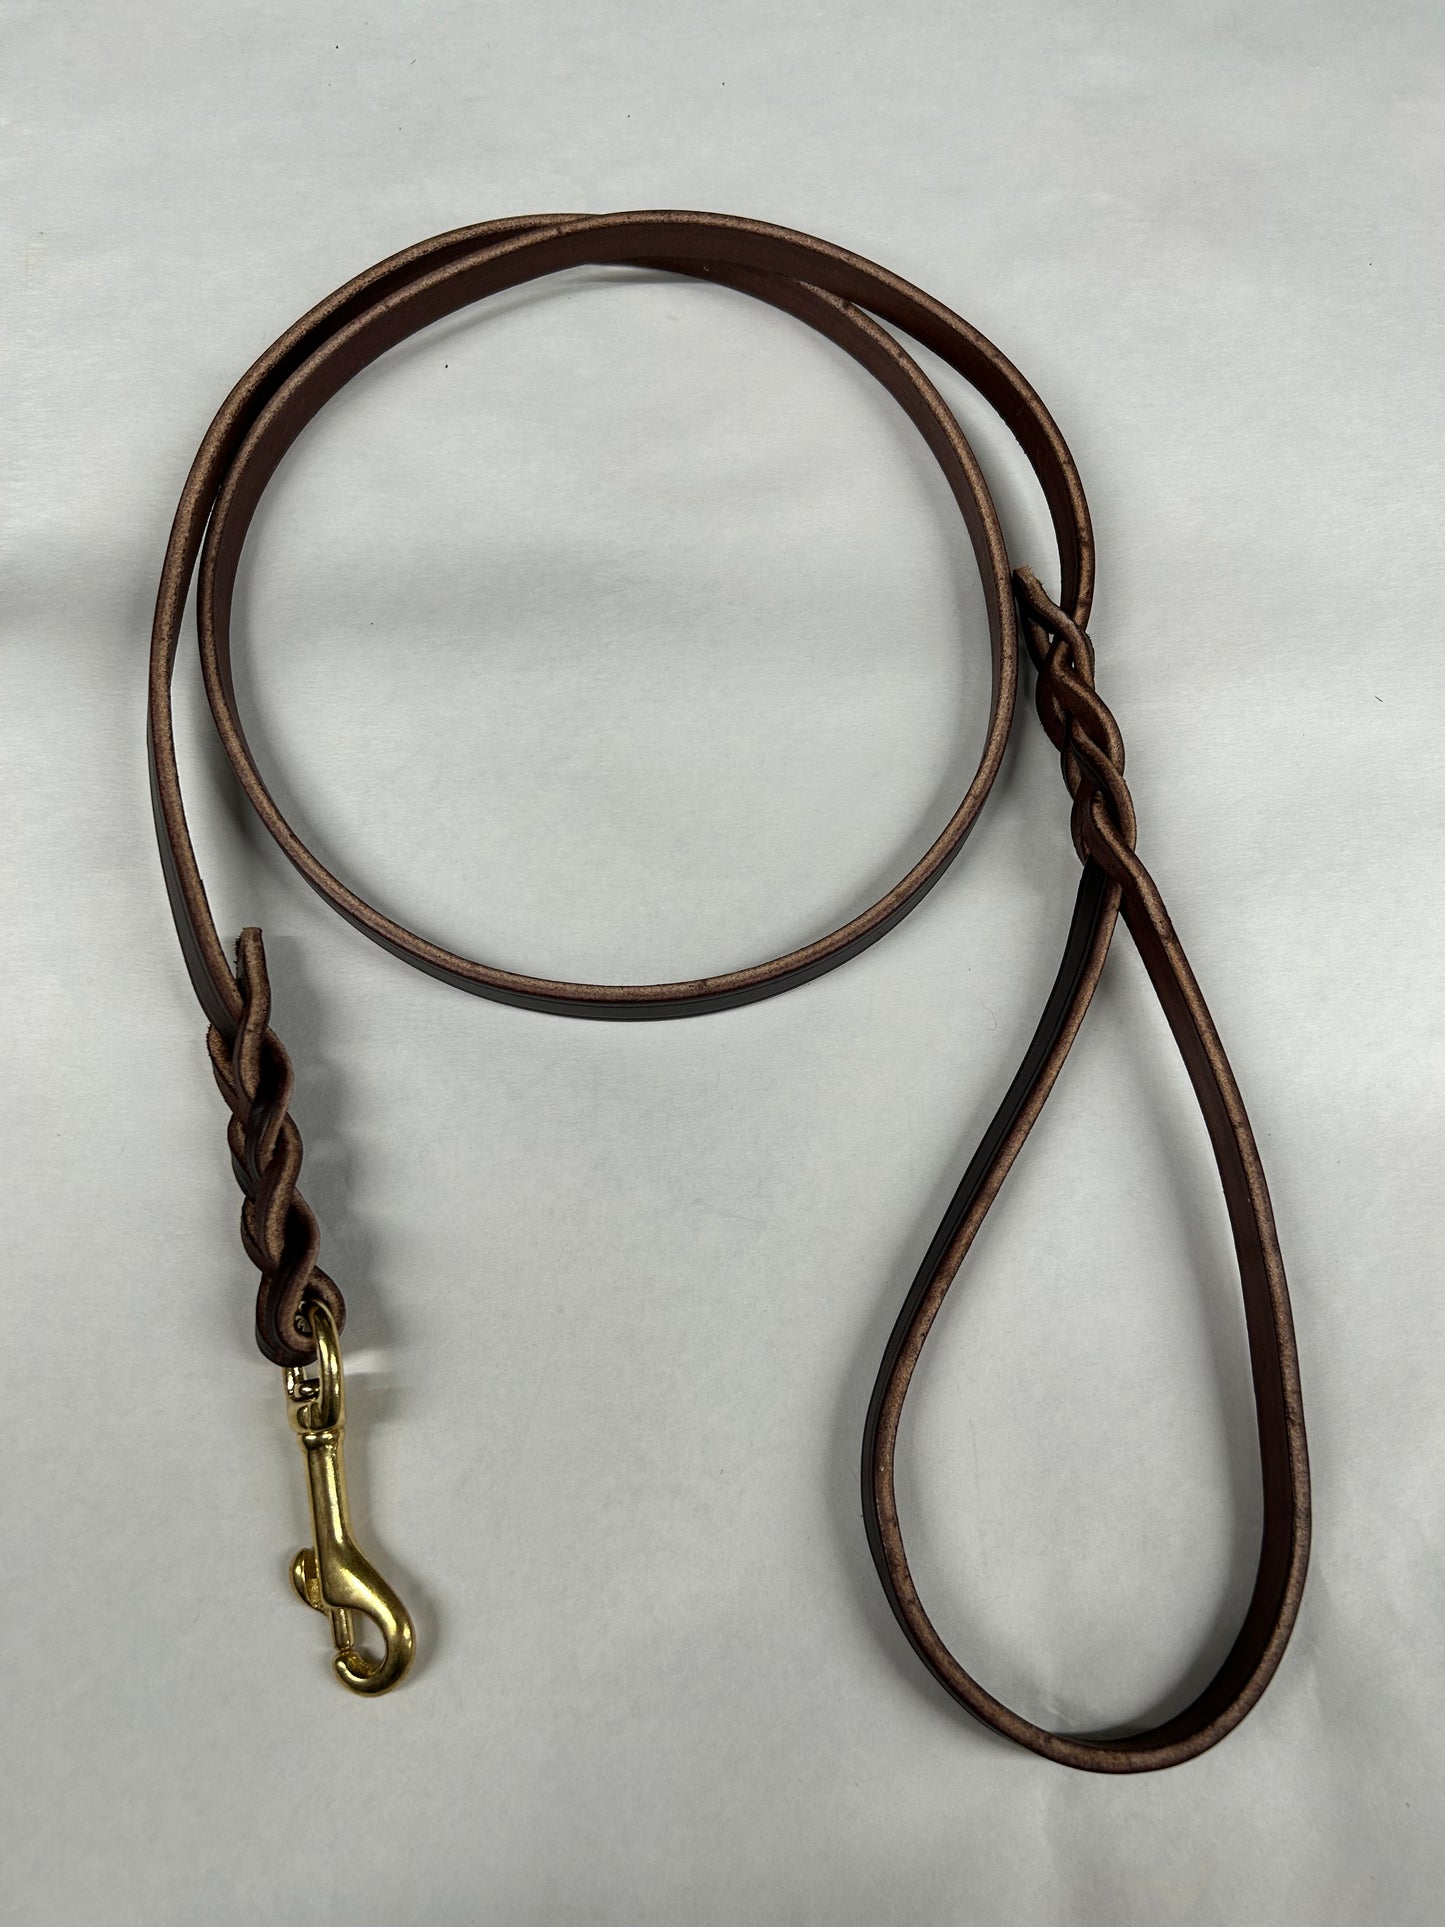 5ft x 1/2in braided leather leash (brown)